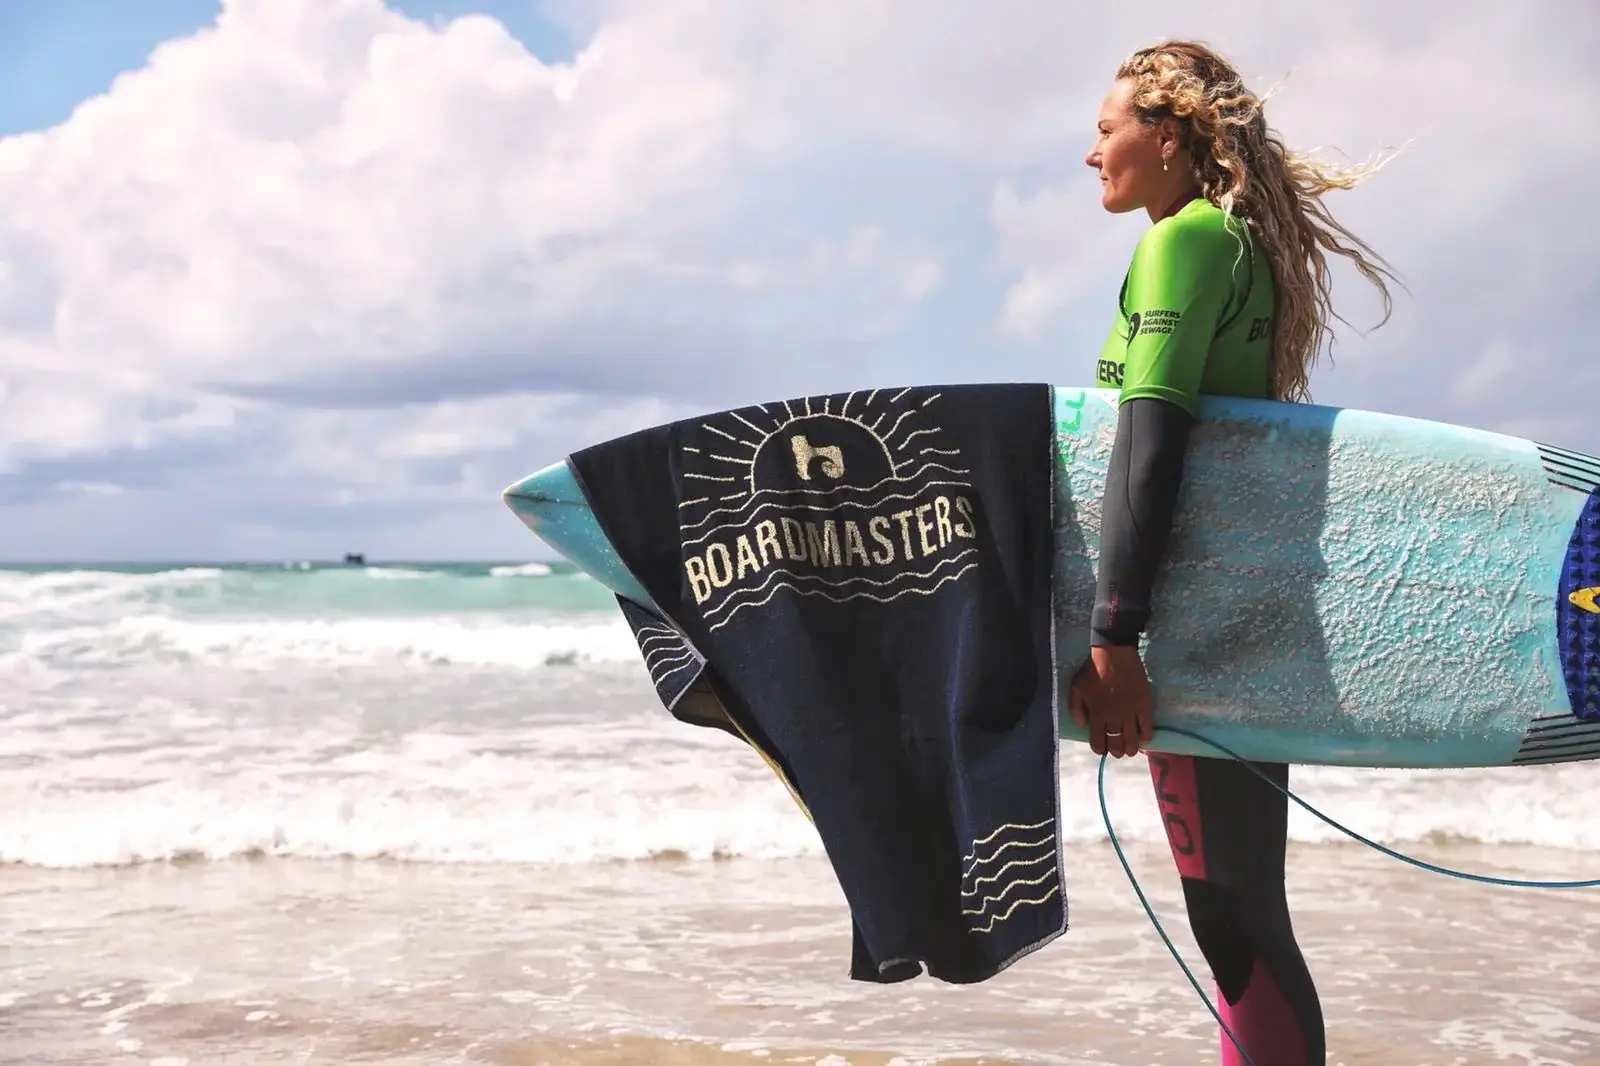 Win VIP tickets to the Boardmasters Festival with Animal